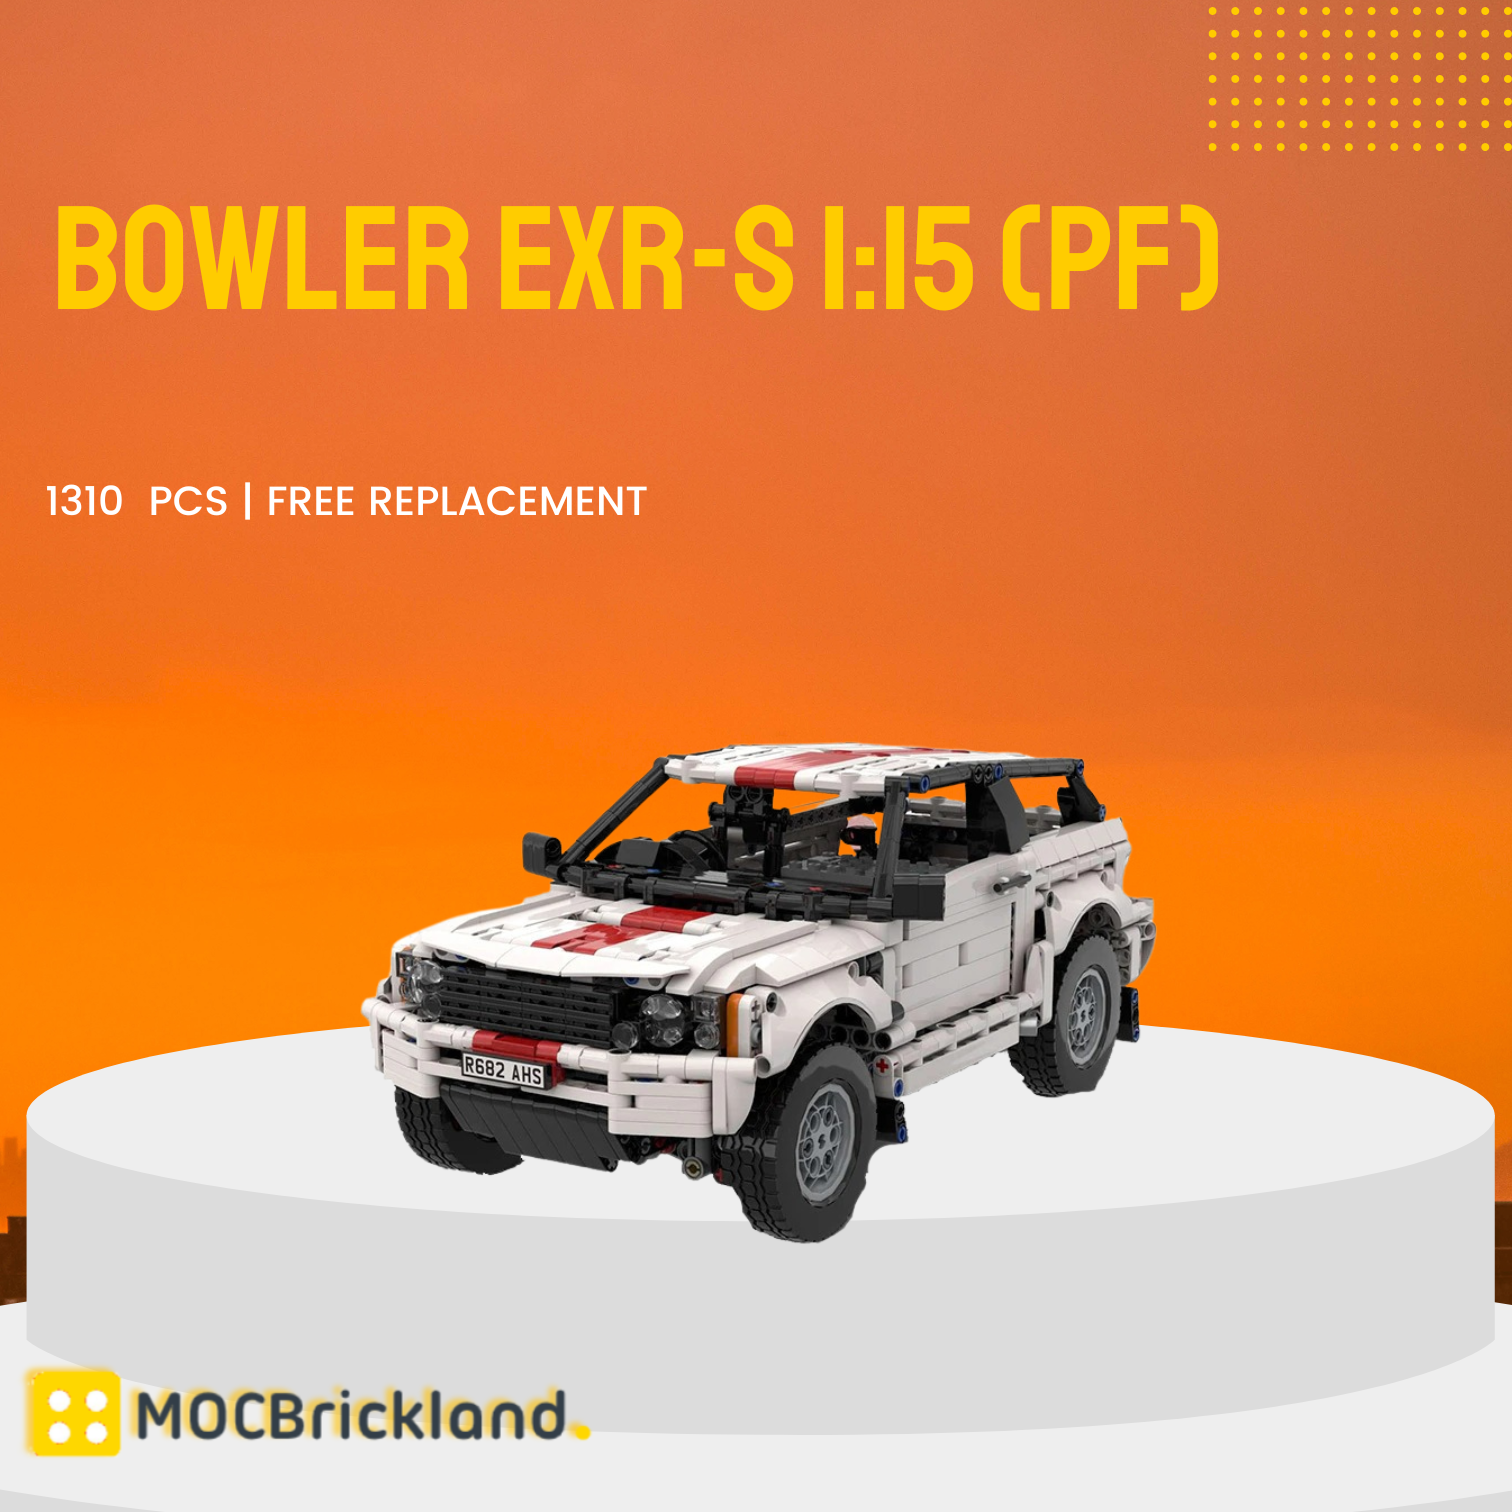 Bowler EXR-S 1:15 (PF) MOC-95110 Technic With 1310 Pieces